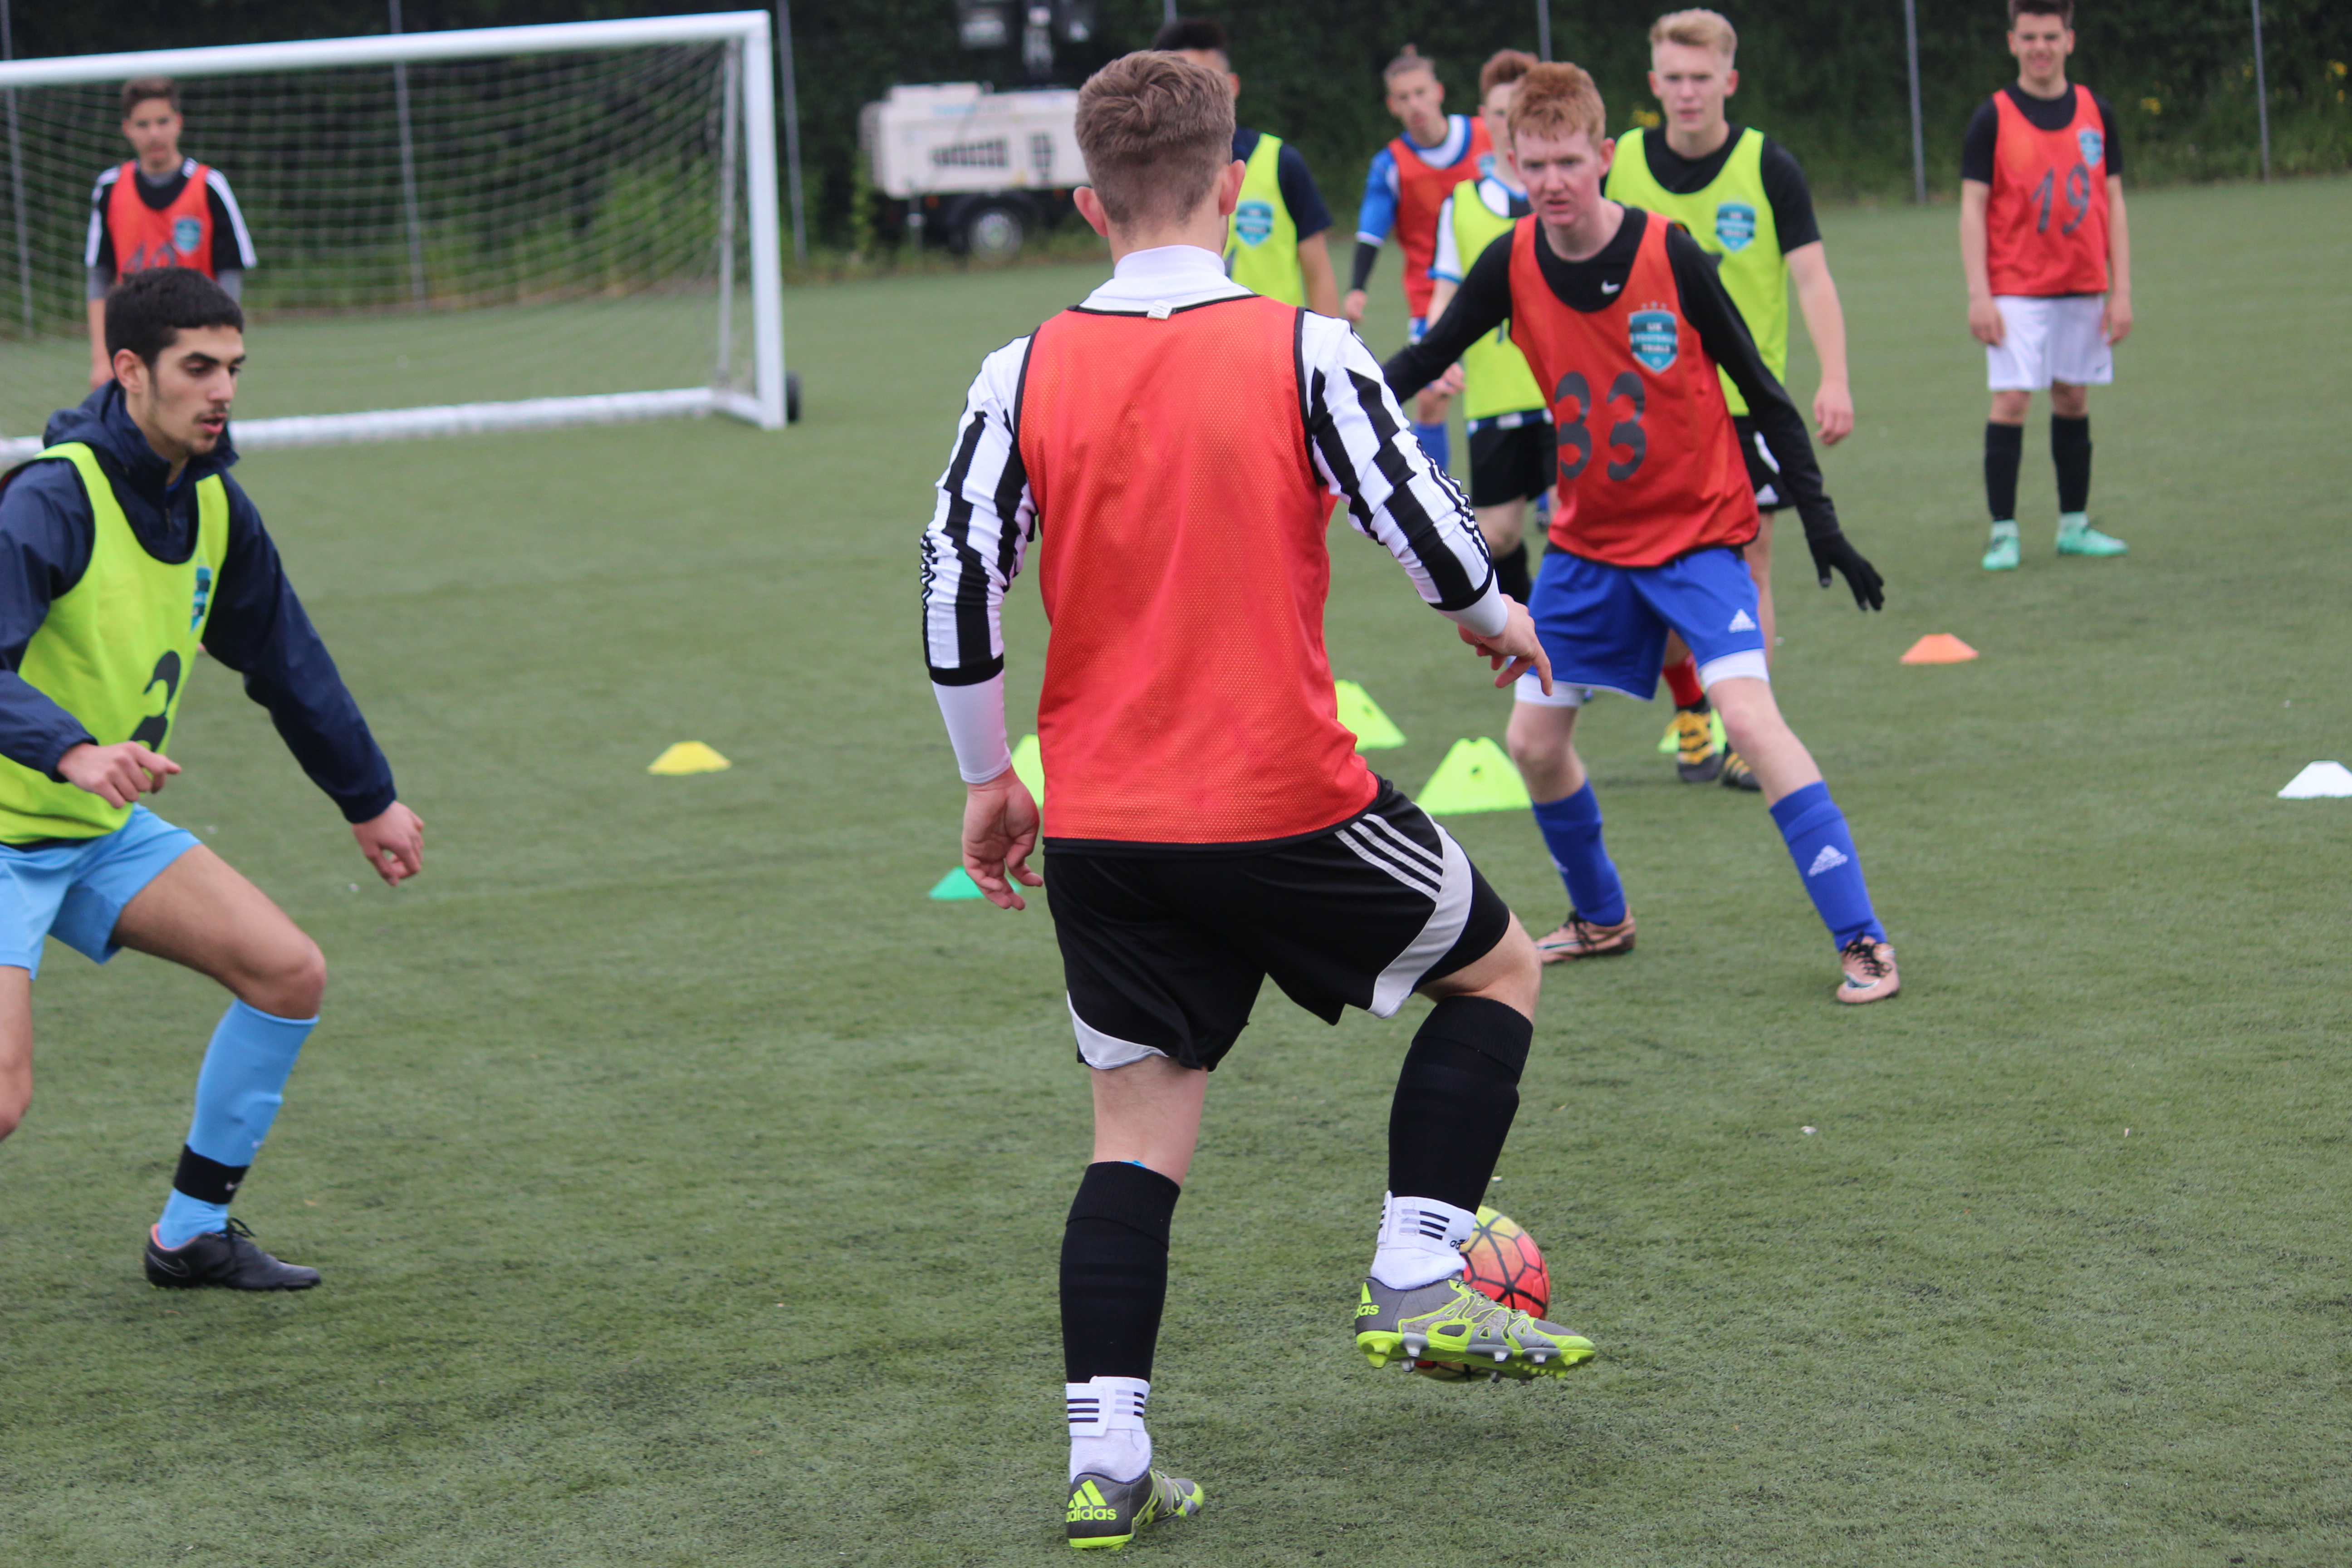 May/June Trials Produce Record Number of Scouted Players